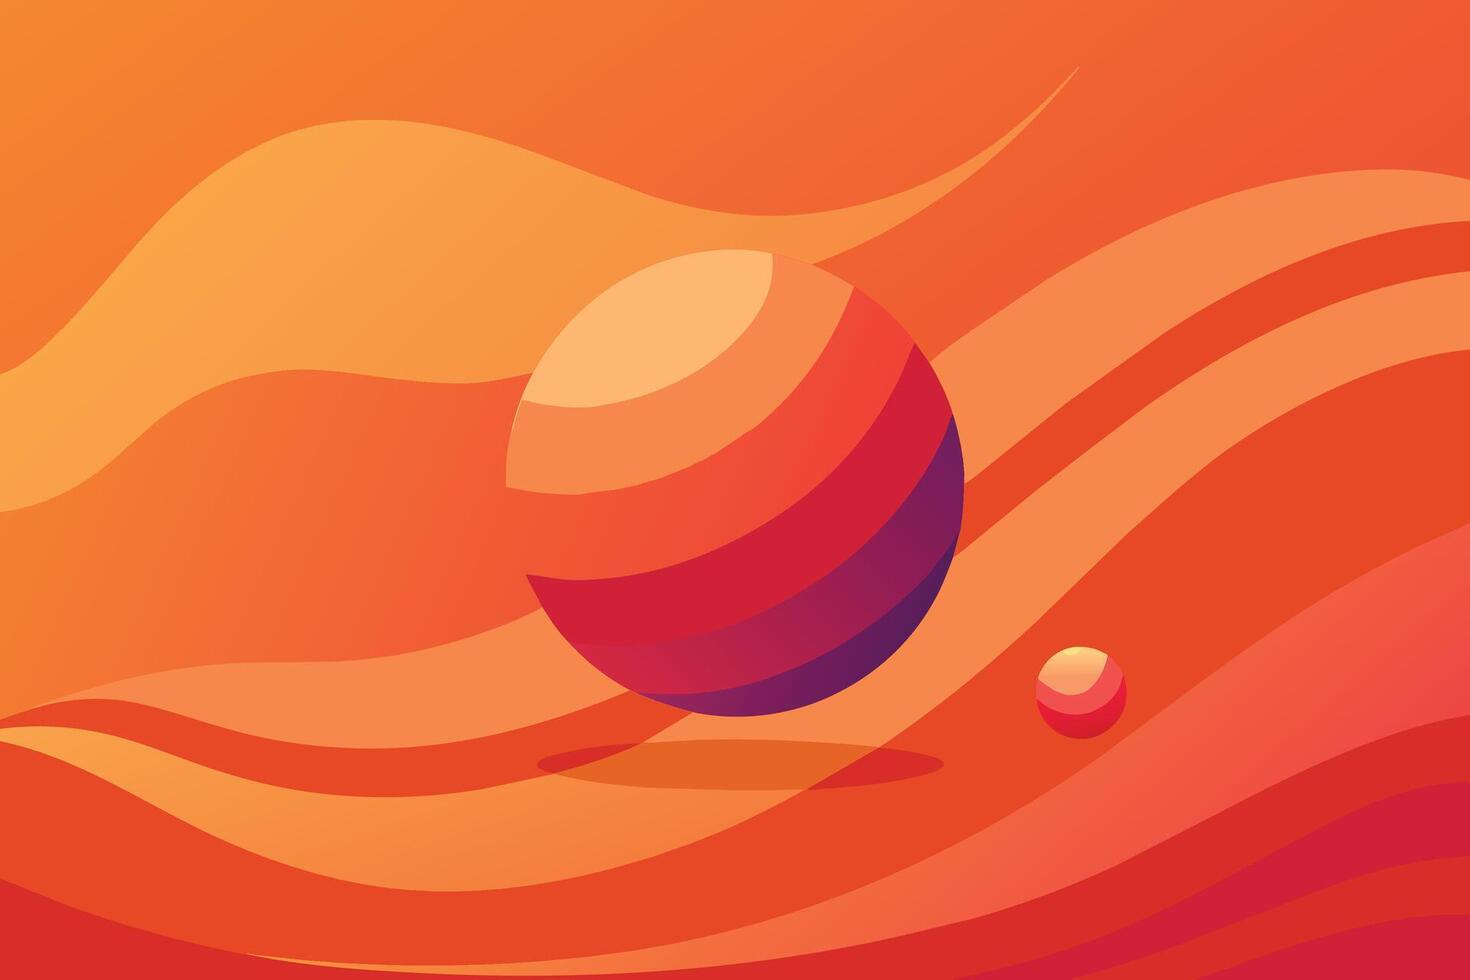 Abstract 3d ball background with smooth shapes vector